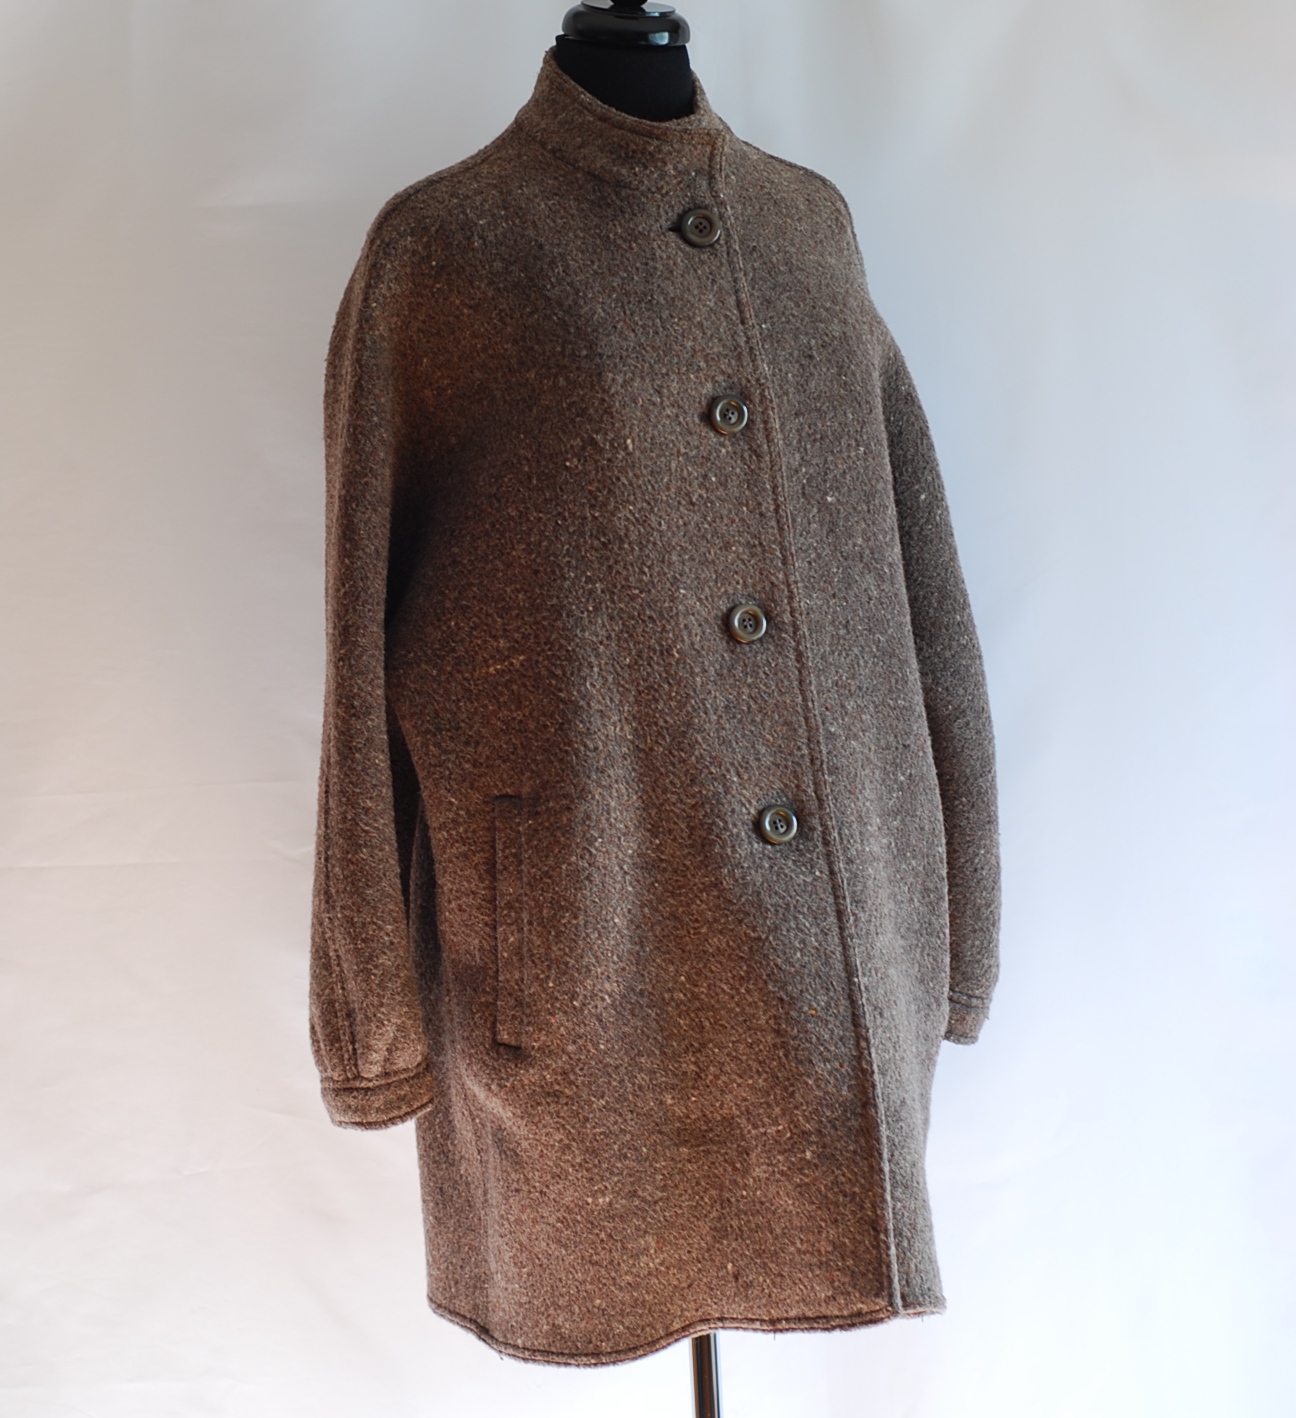 Weinberg Paris 1960’s Wool Swing Coat With Green & Gold Stripes Inside ...